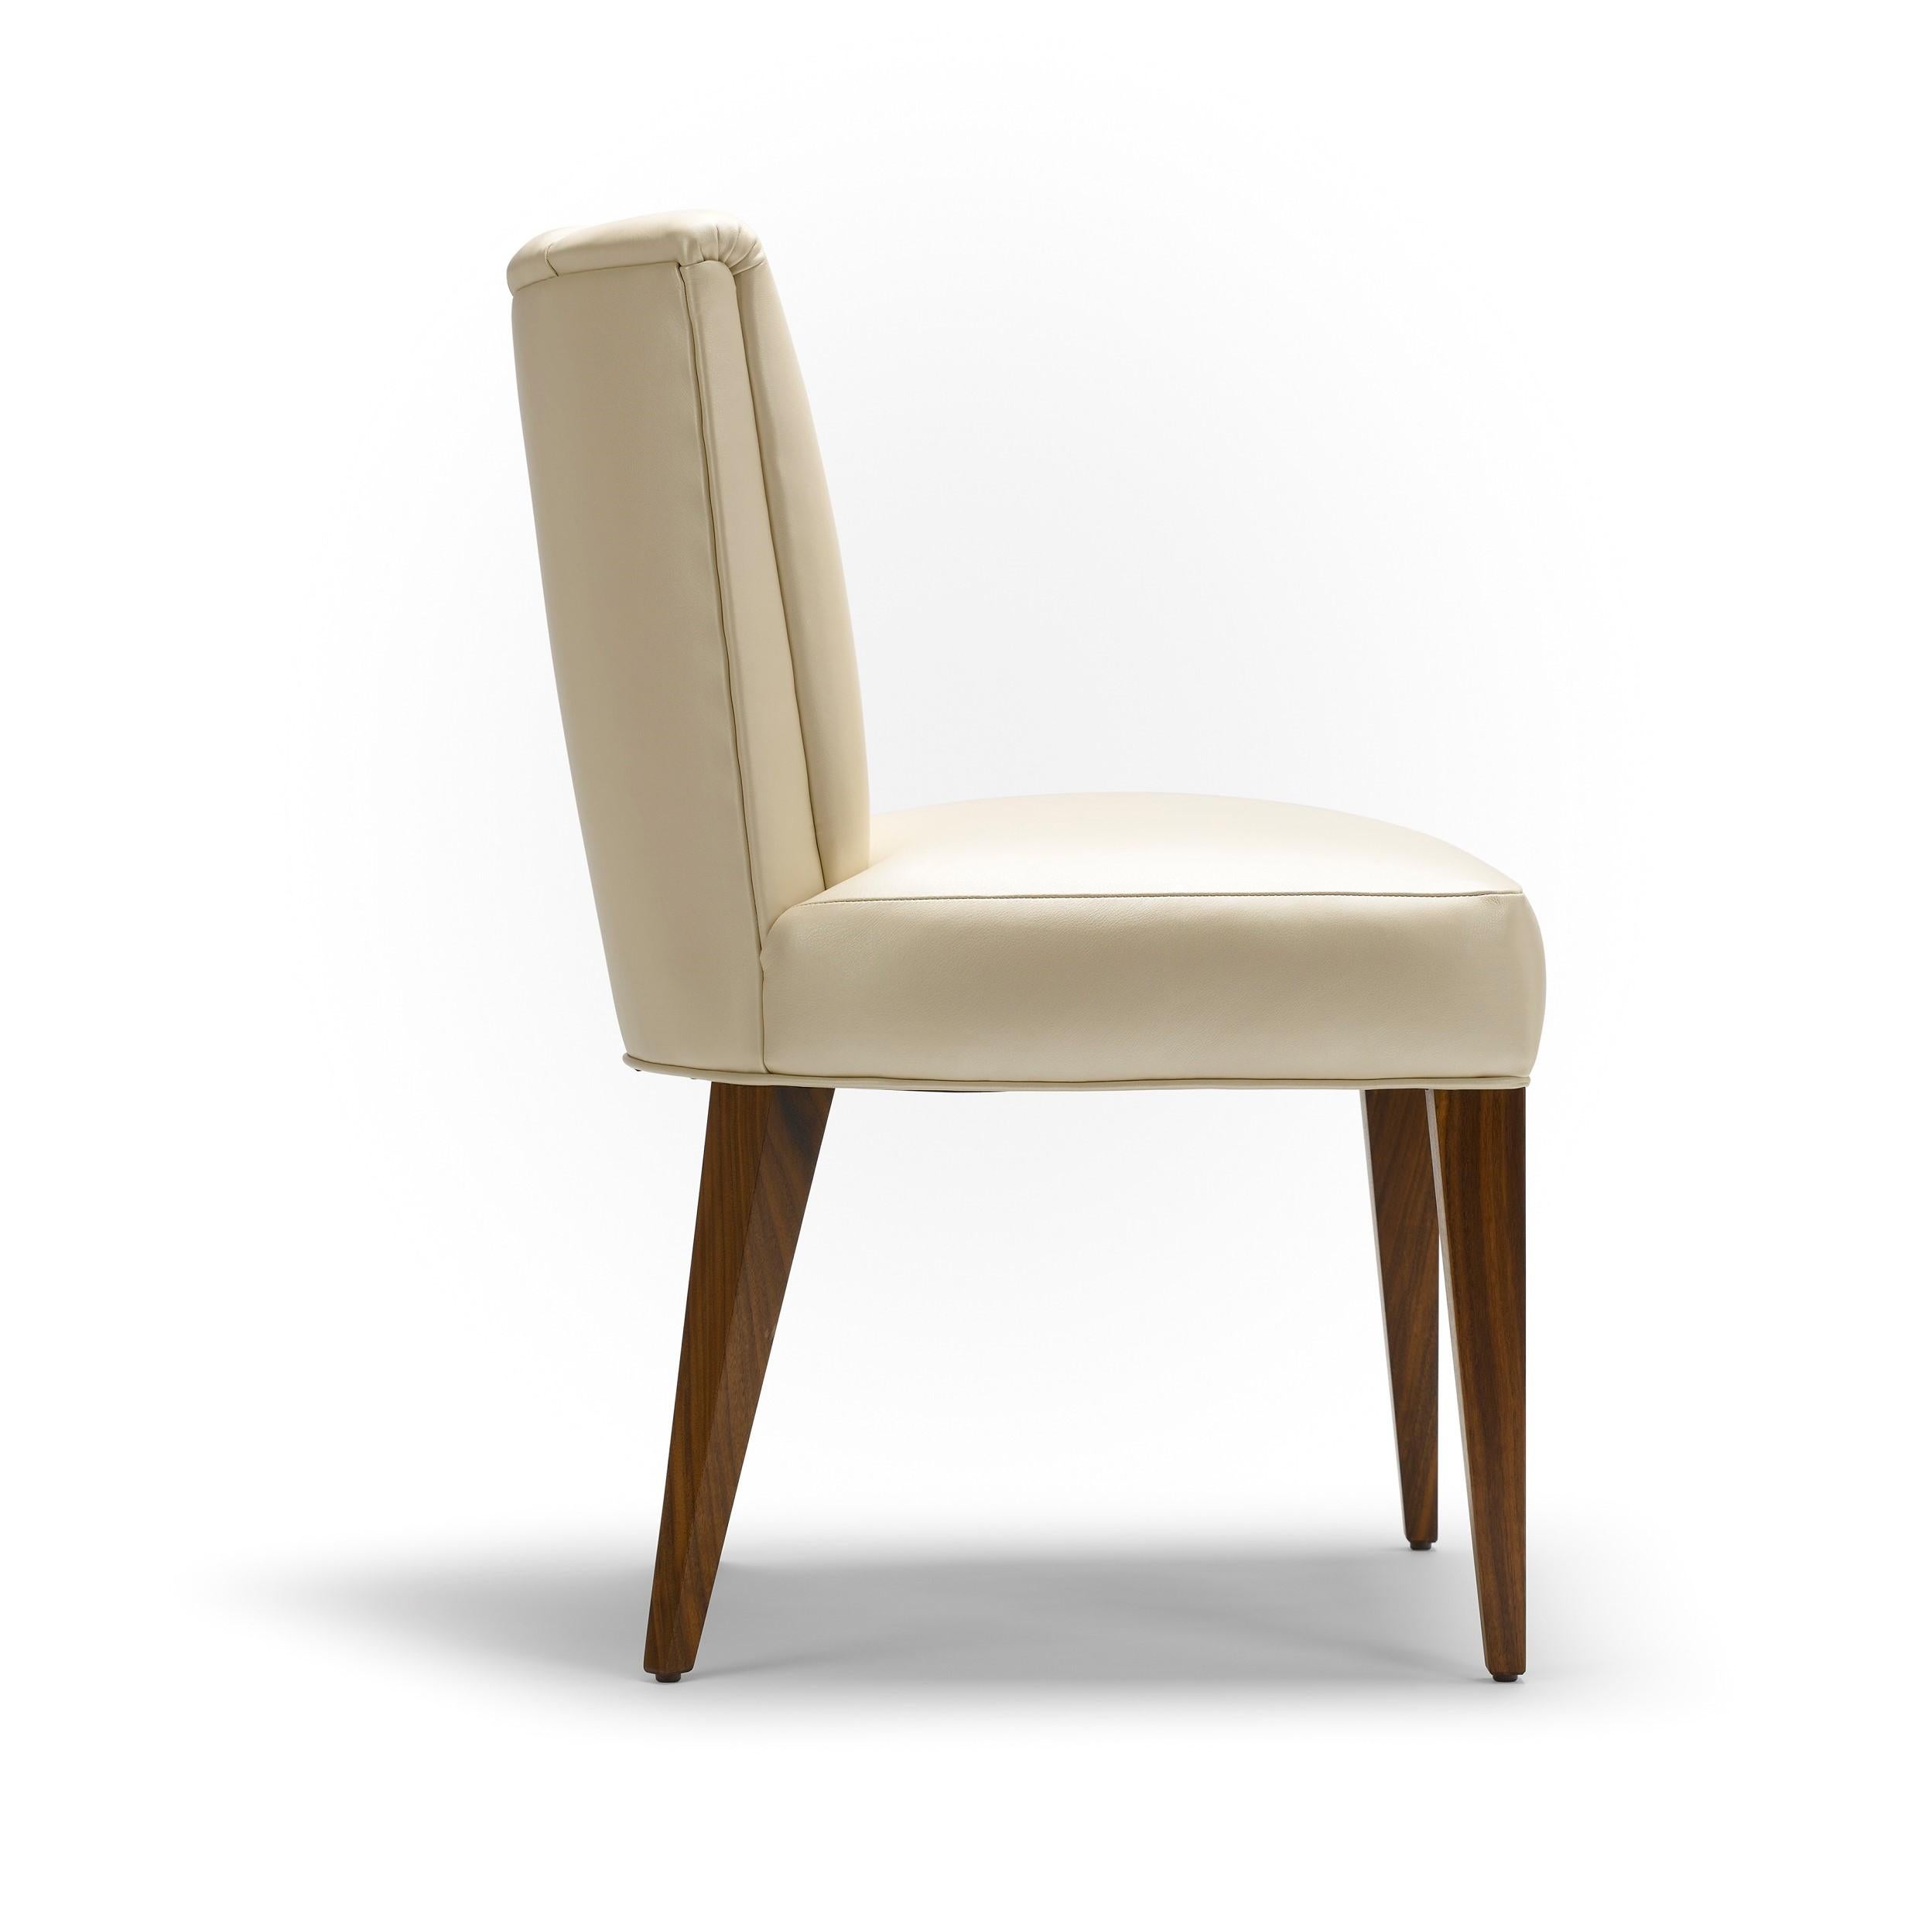 A sophisticated and simple silhouette with beautifully detailed flutes. This dining or occasional chair effortlessly appeals. Shown here: upholstered in half grain pearlized leather, with natural oiled walnut legs.

Construction: solid walnut